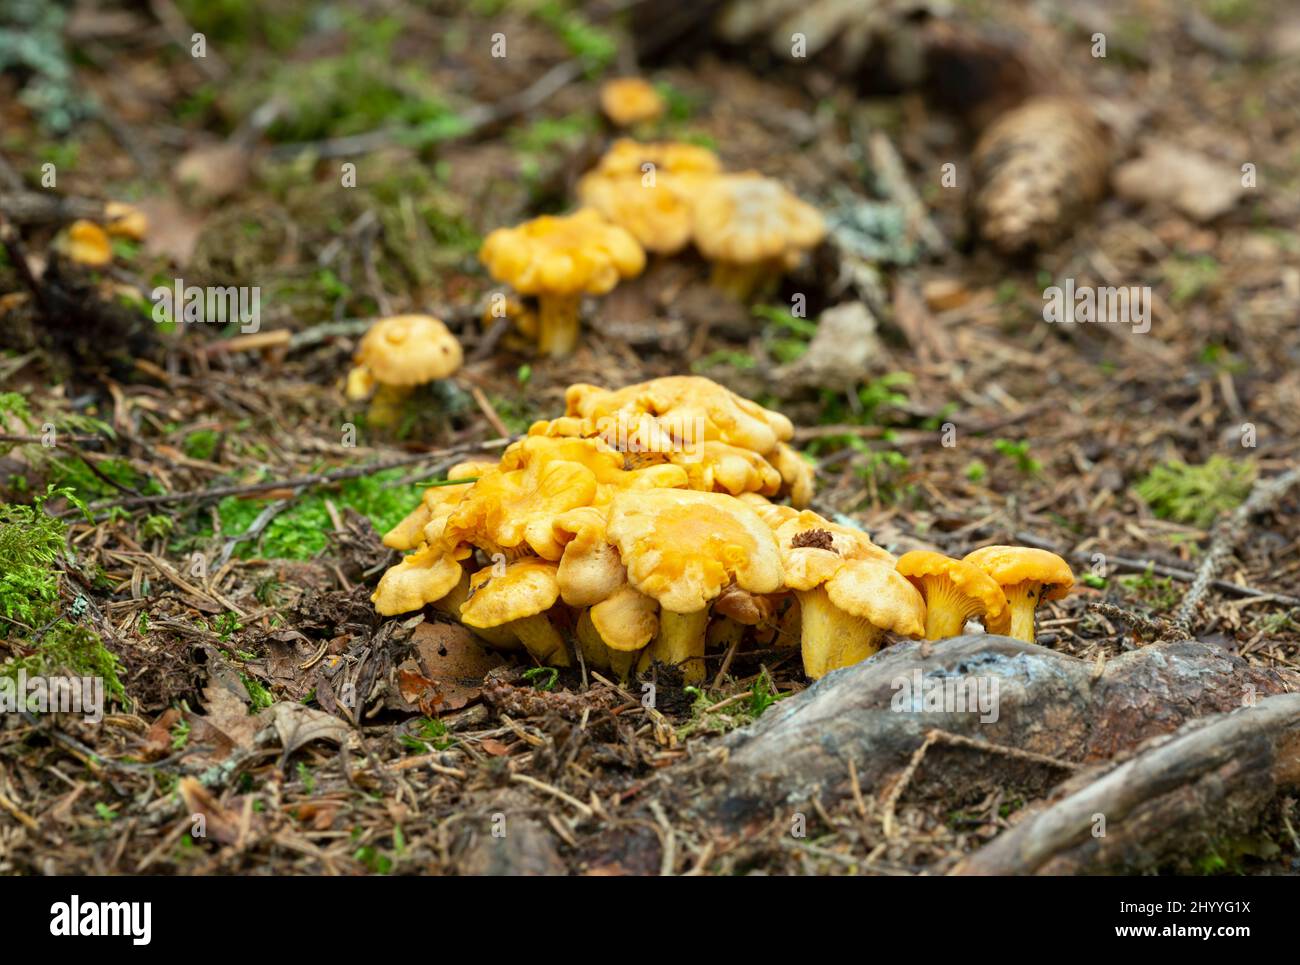 Young fruiting bodies of Golden chanterelle, Cantharellus cibarius in natural environment Stock Photo